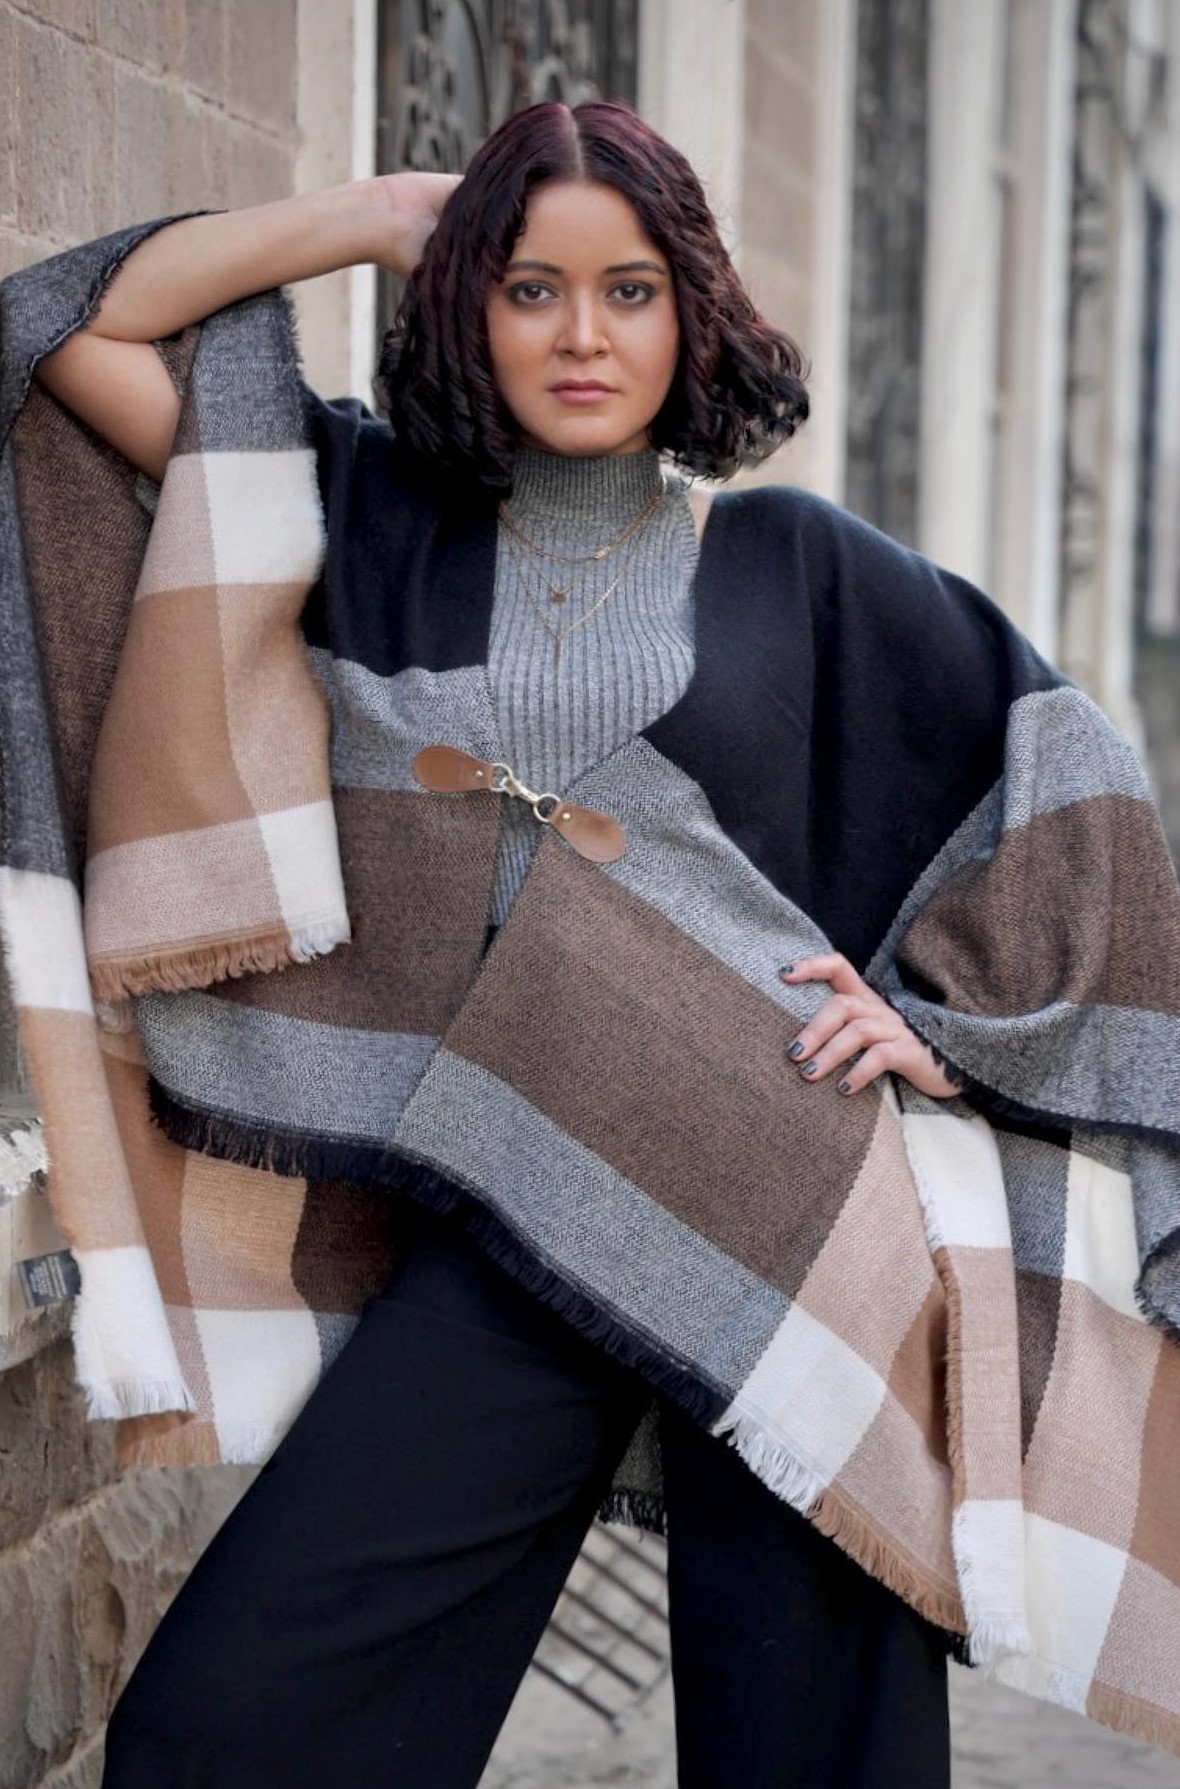 Parvathi Nirban In Buffalo Plaid Blanket Poncho Paired With Black Flared Pants Chic & Cool Stylish Outfits & Looks